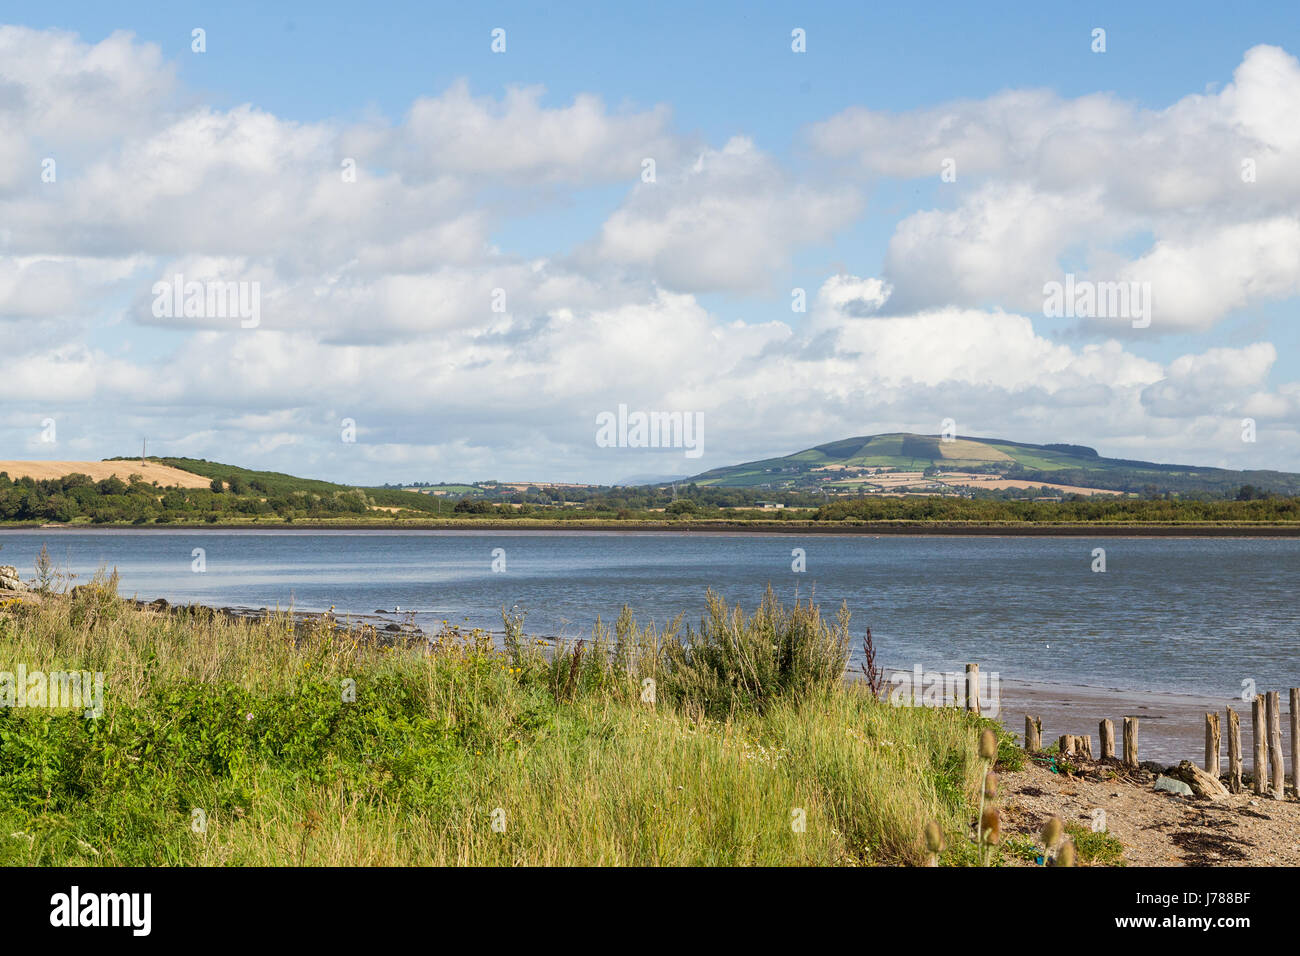 A grassy river bank in ireland overlooking green hills in cheekpoint, county waterford Stock Photo